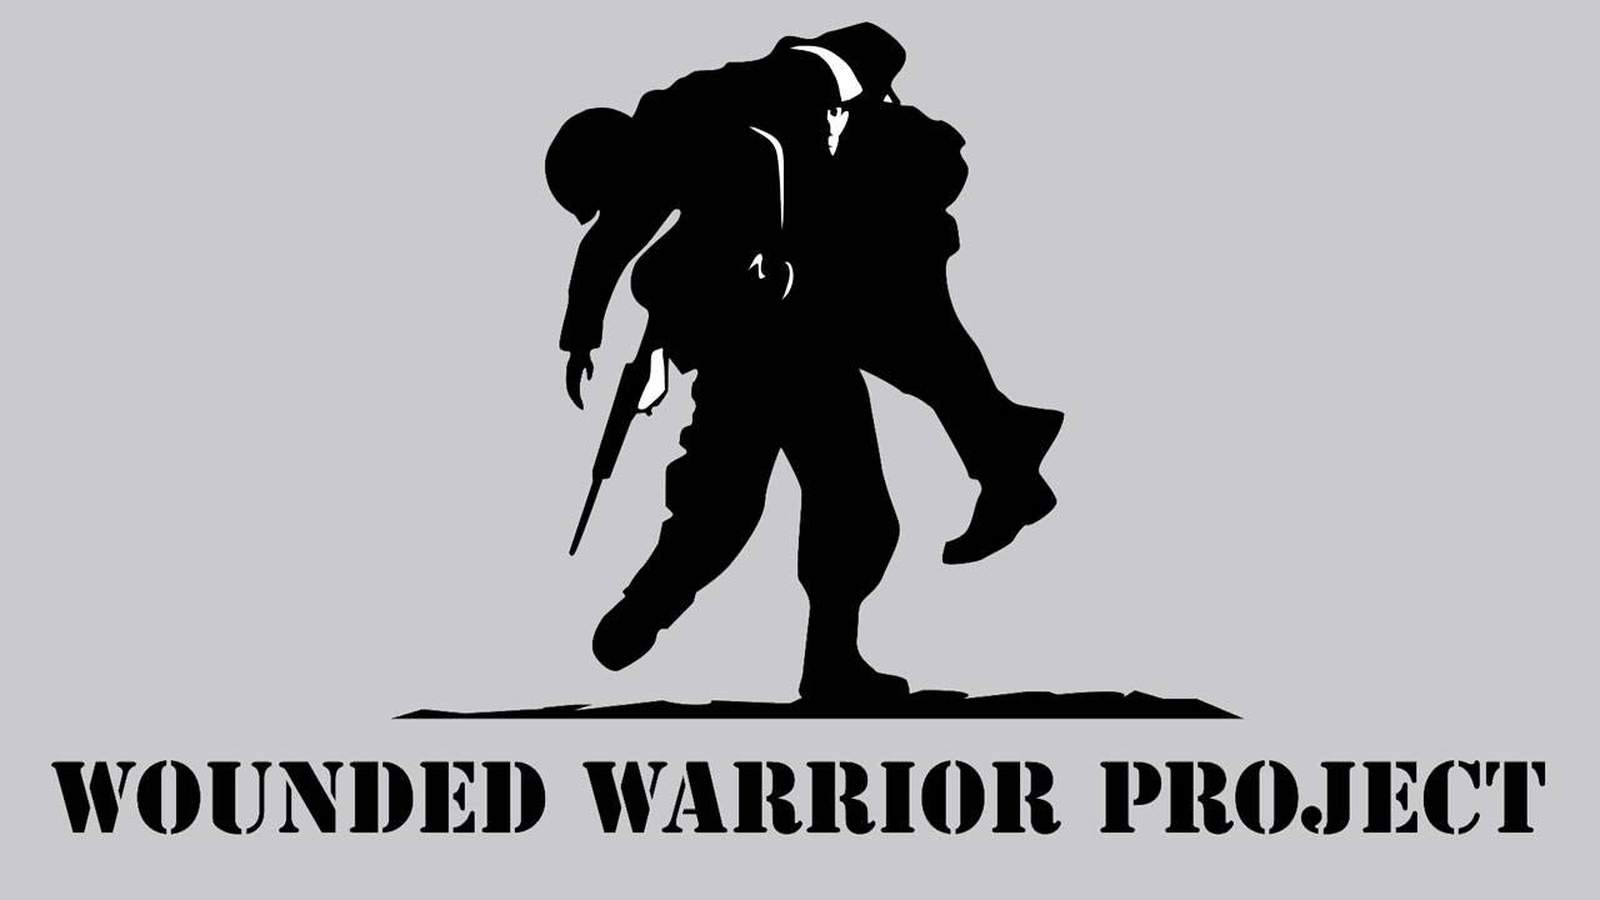 Wounded Warrior Project accused of